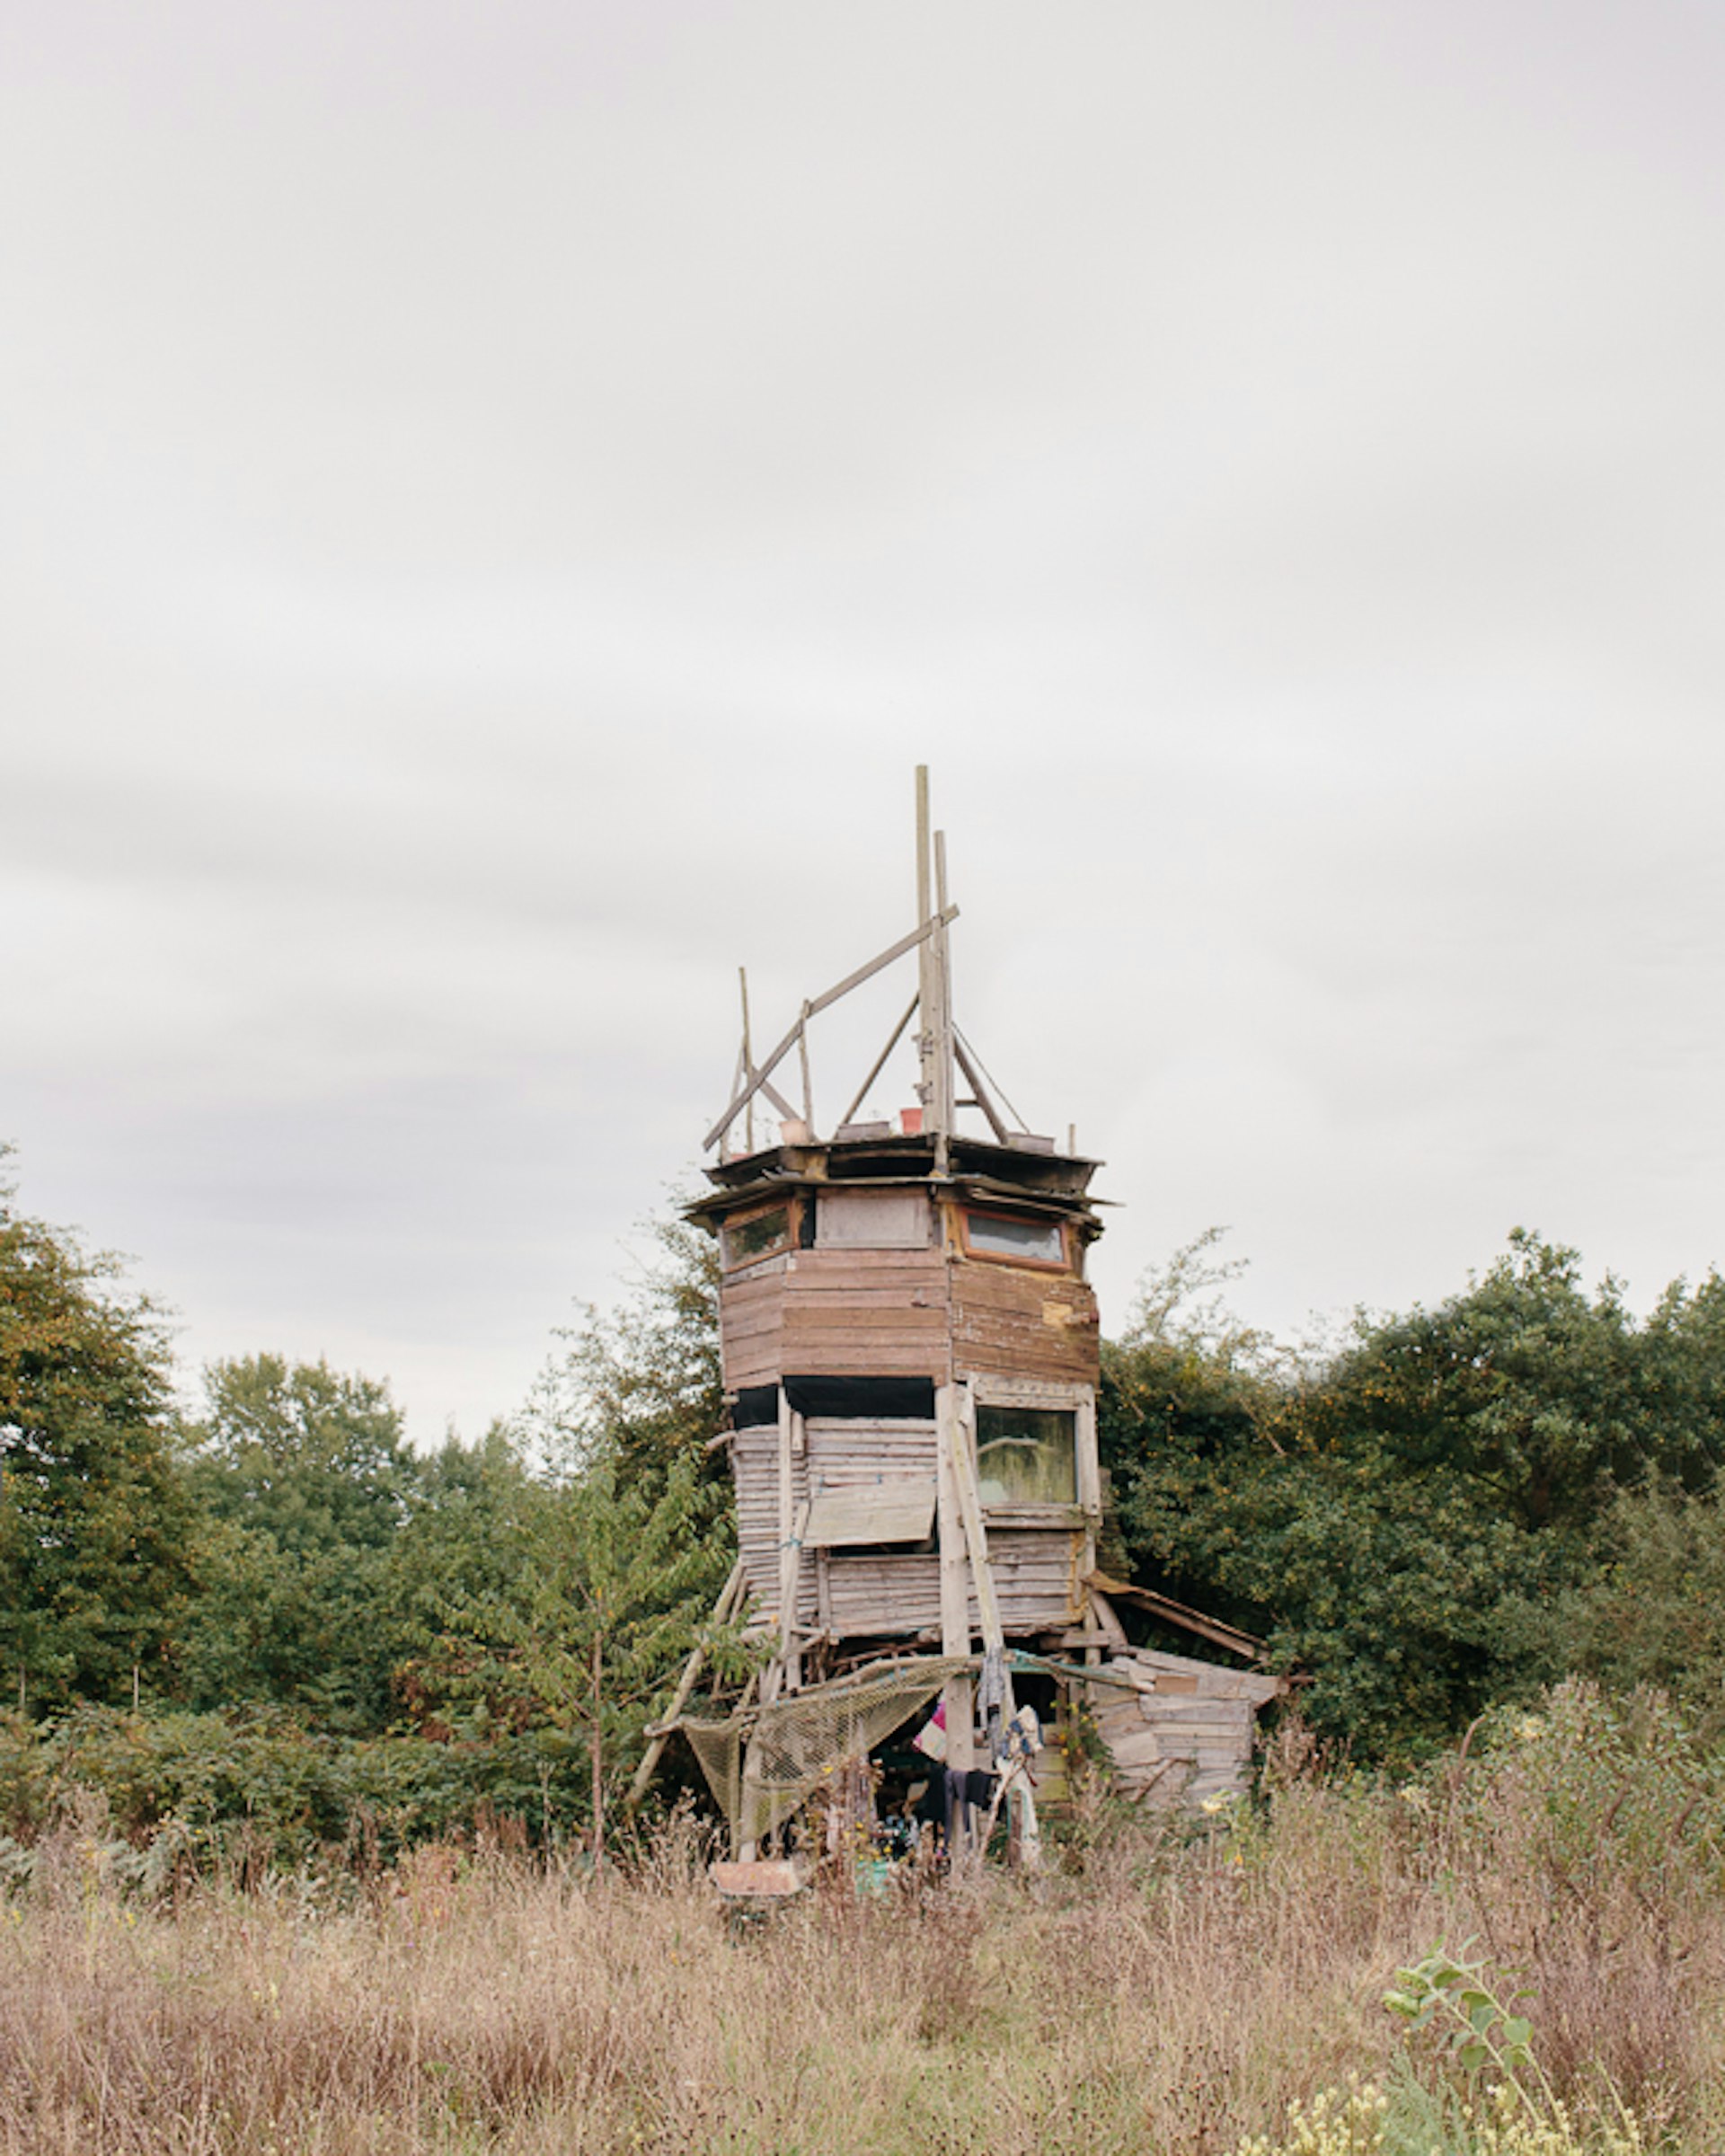 Le Tour, a tower which Alex has built from only found wood. He and his dog will live here until his mud house is finished.